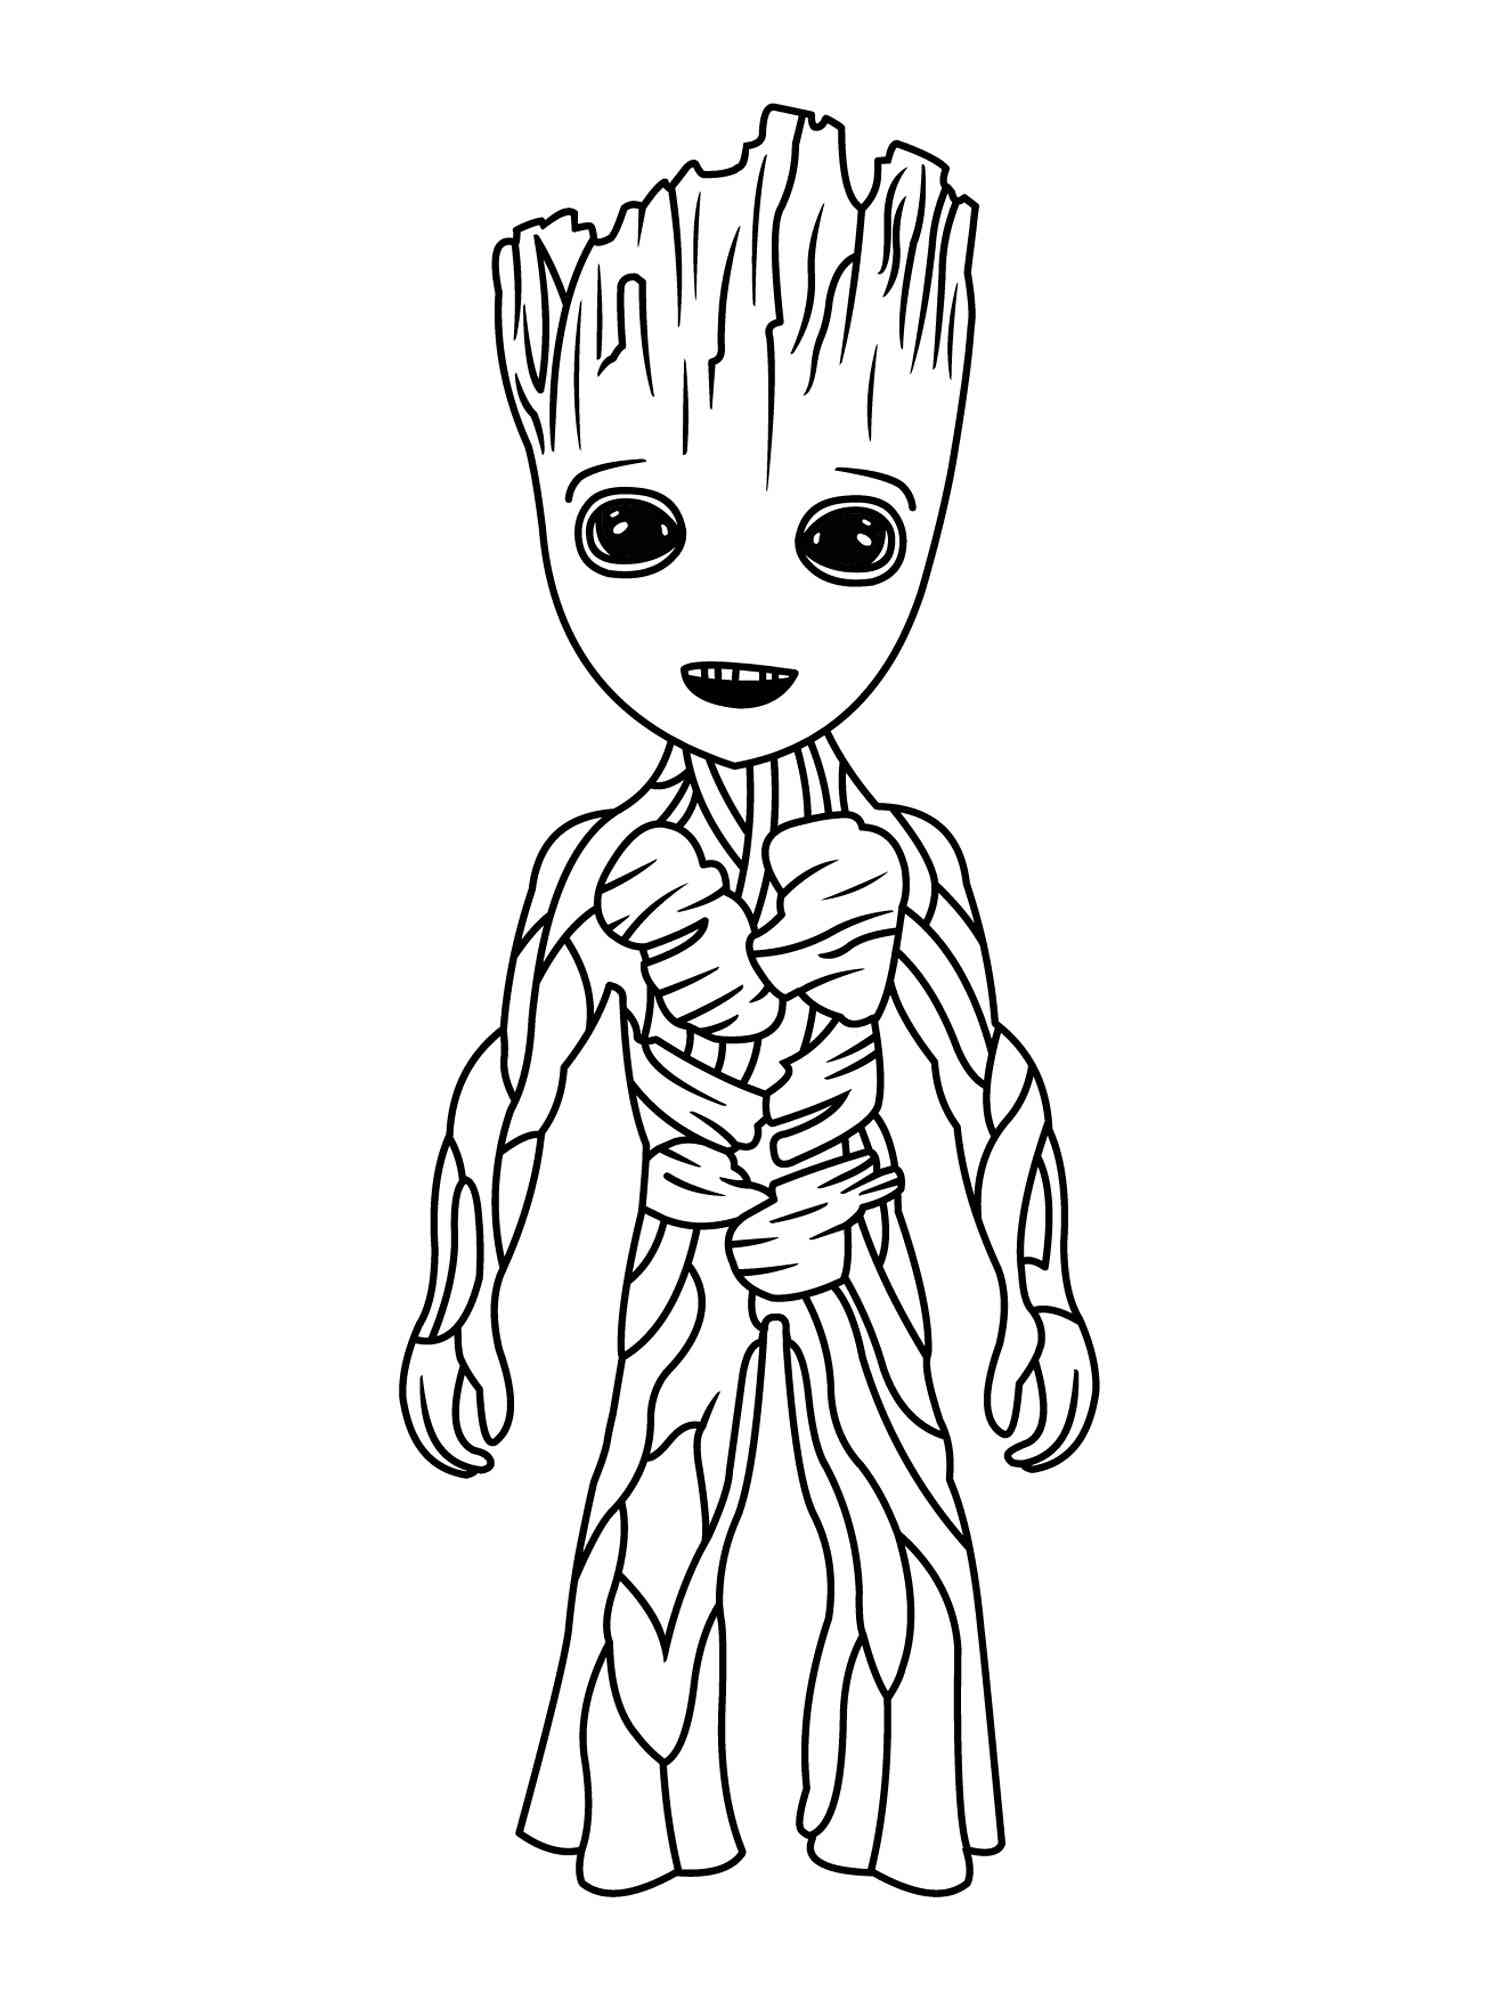 Common Groot coloring page